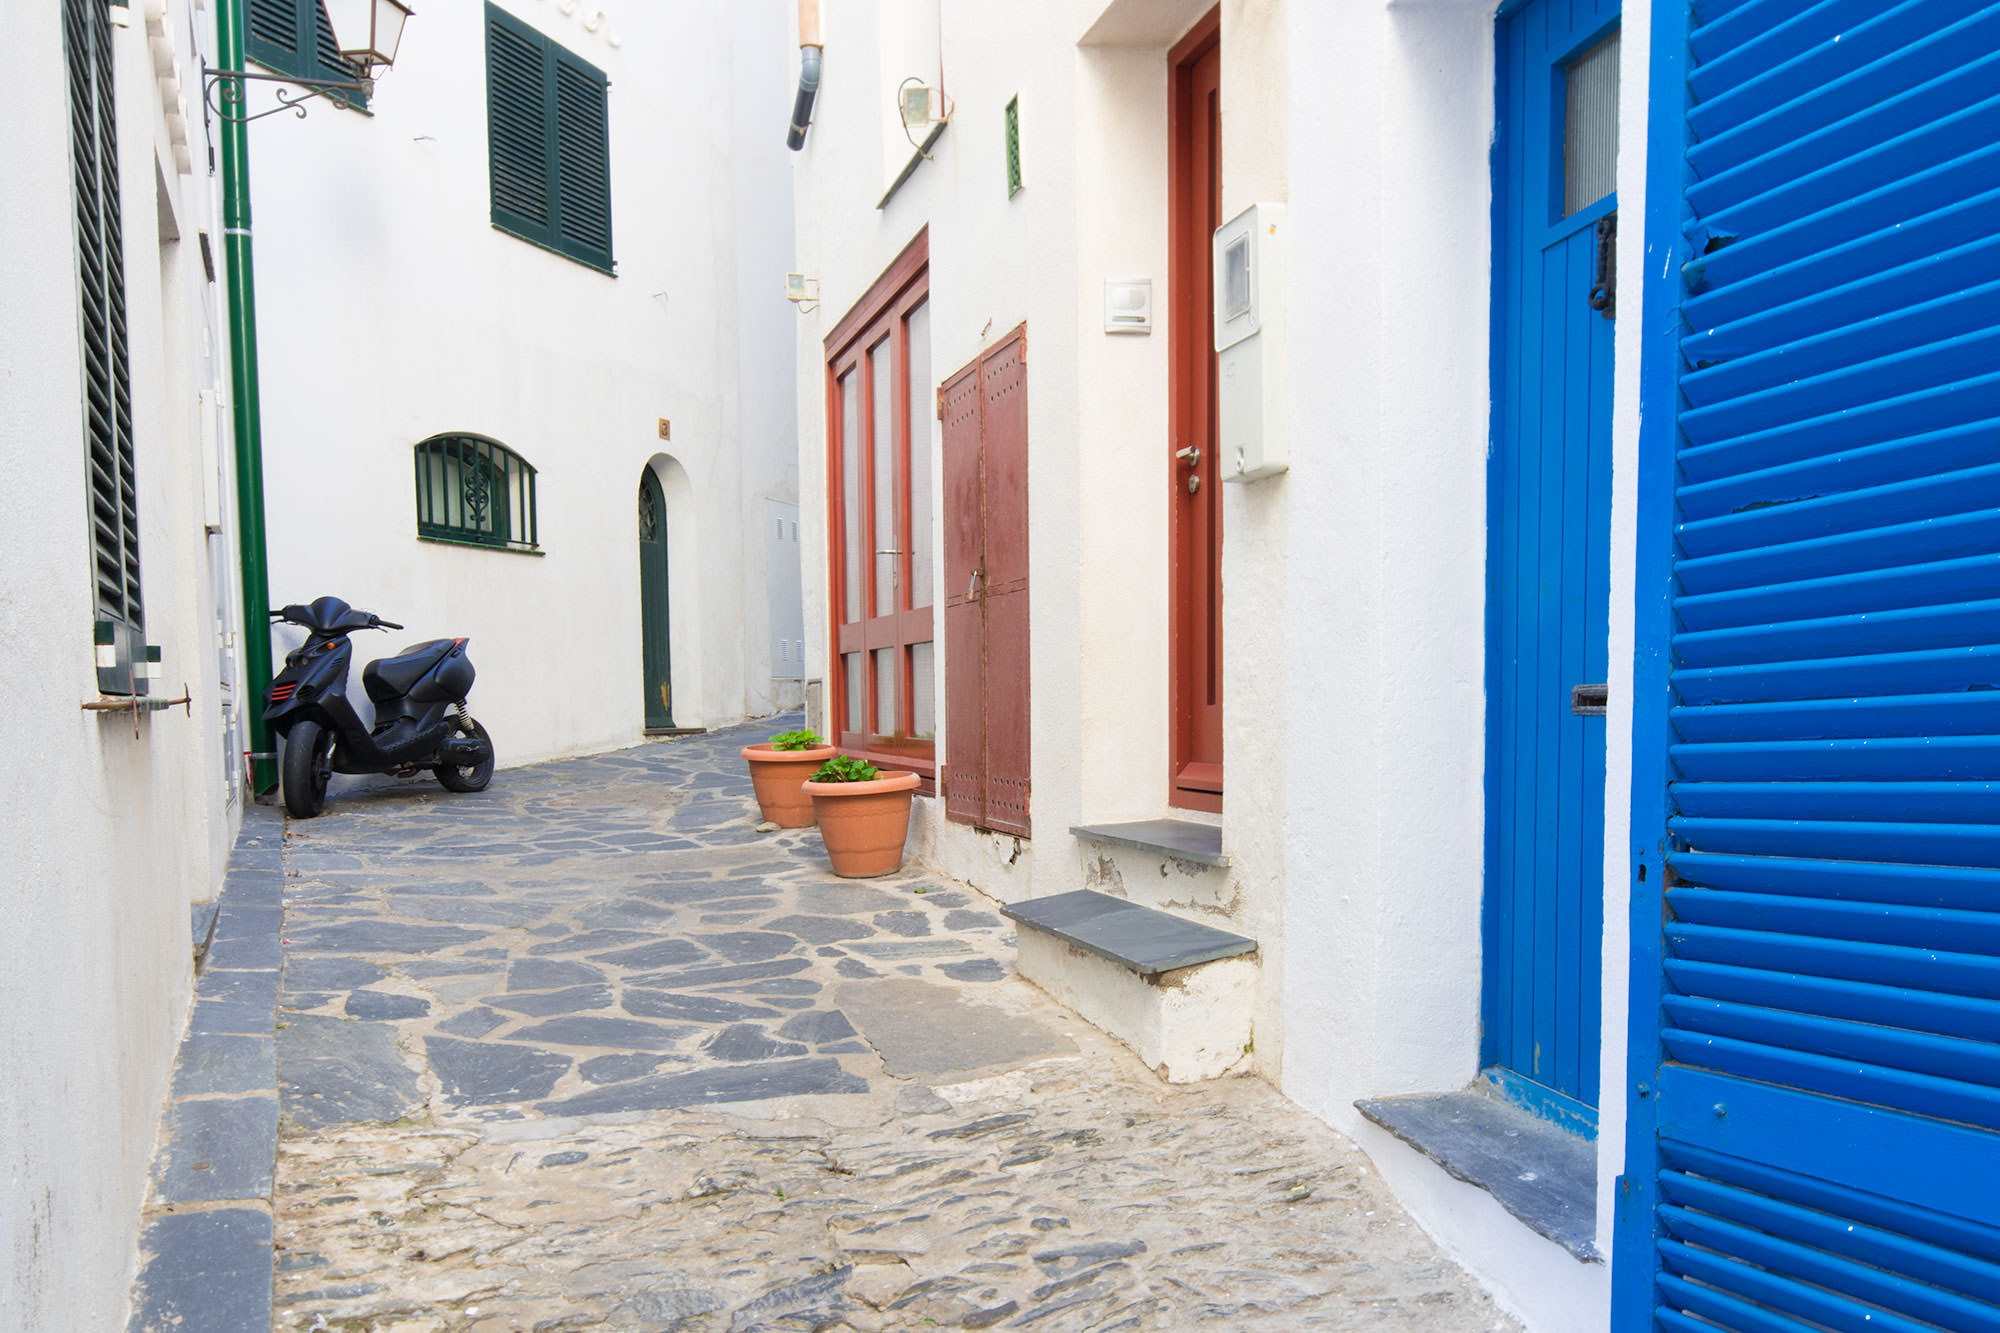 Street in Cadaques